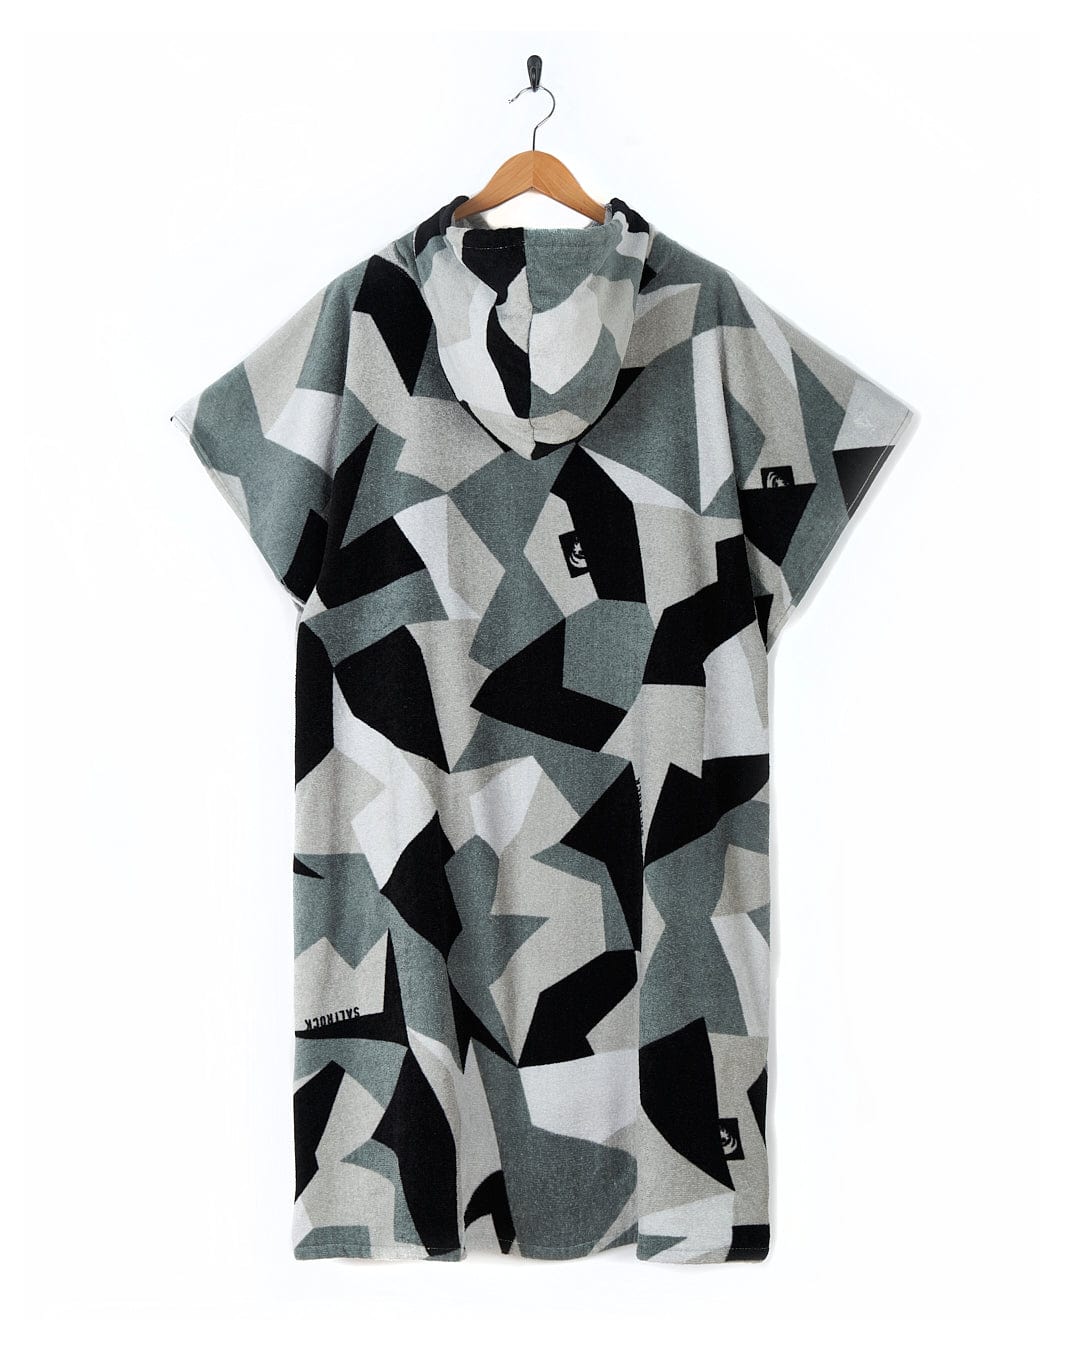 A 100% Cotton Geo Camo t-shirt hanging on a hanger against a white background.